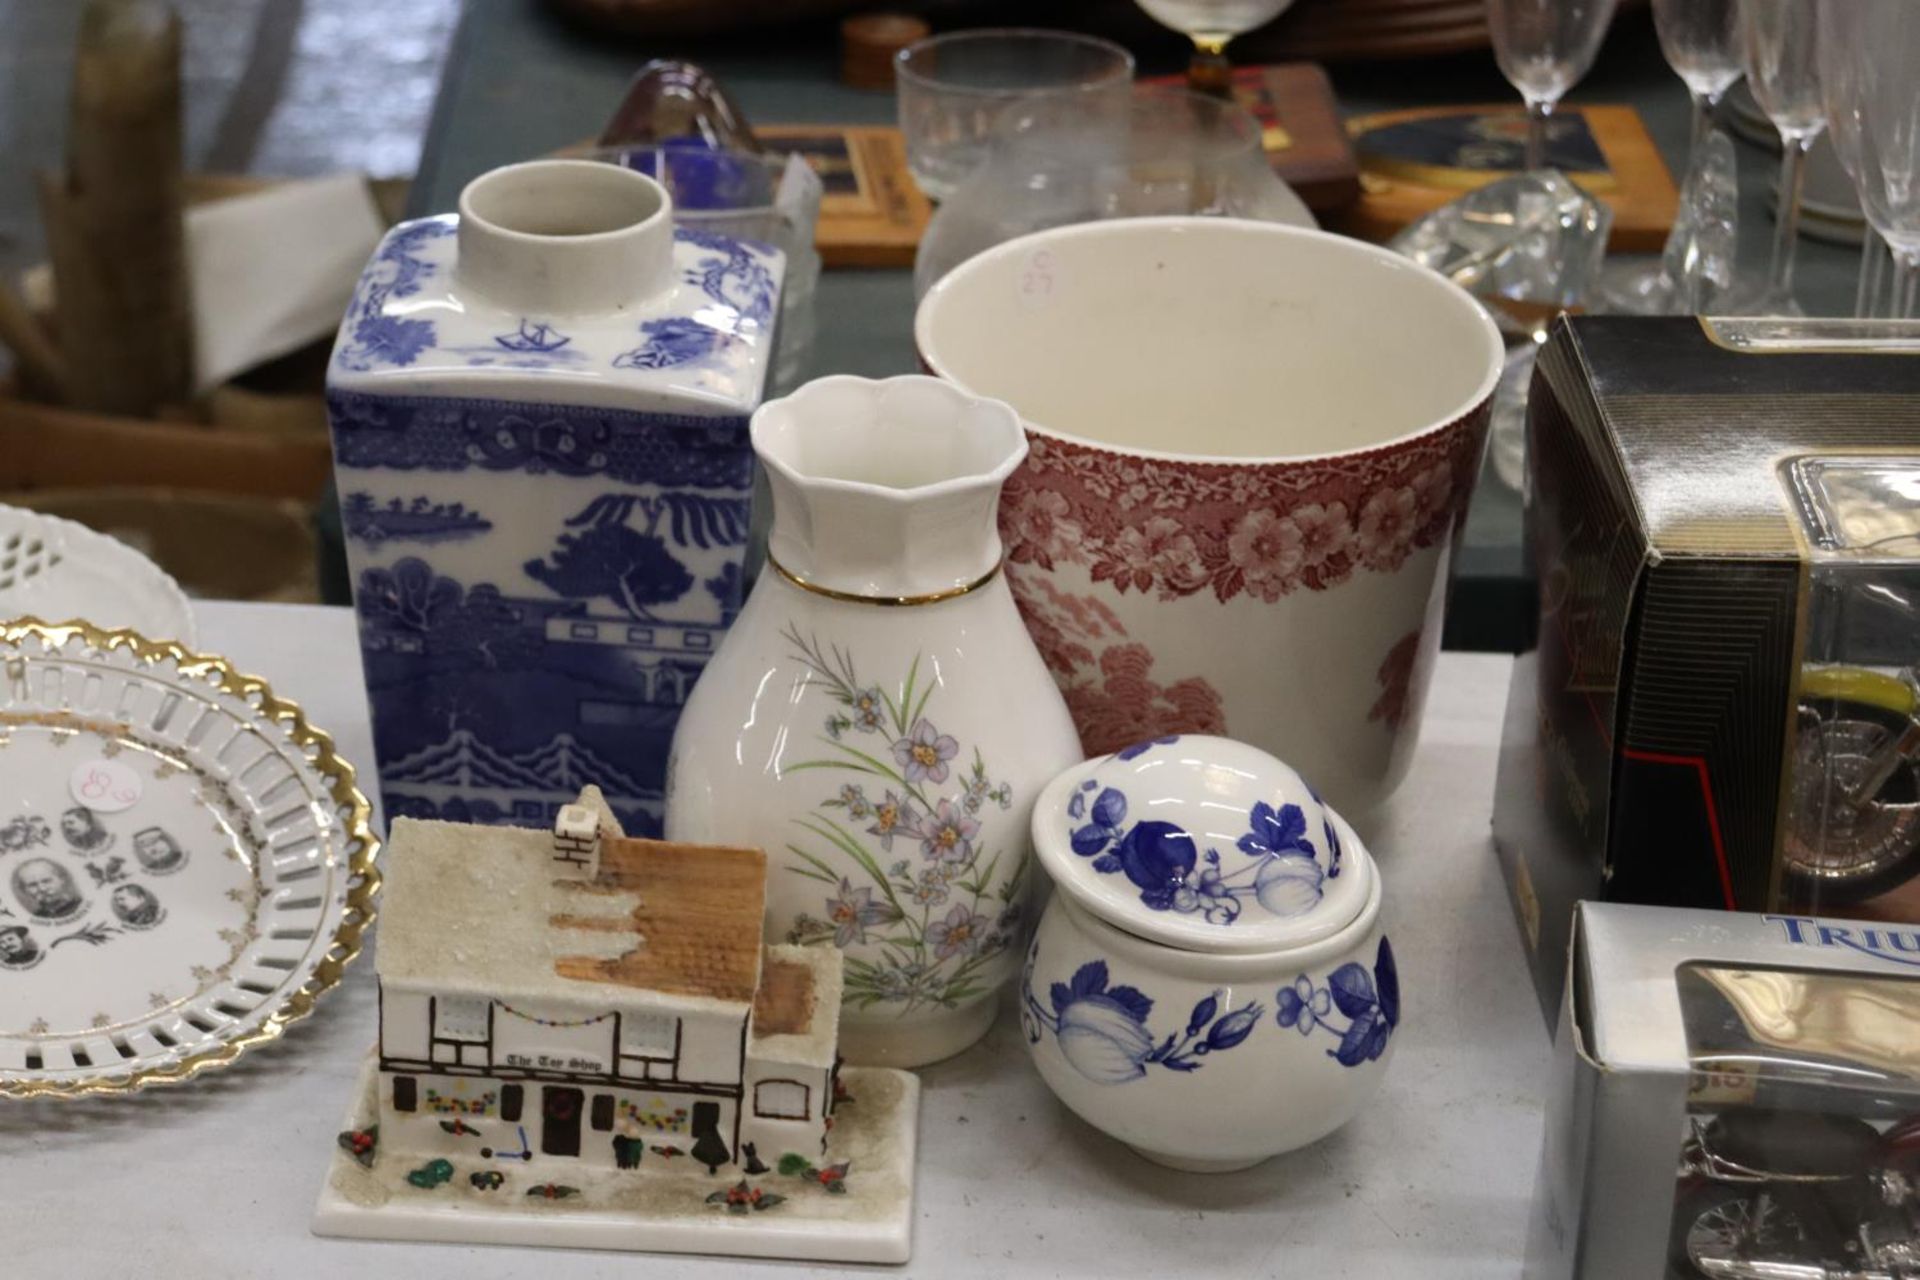 A QUANTITY OF CERAMIC ITEMS TO INCLUDE A PLANTER, VASES, A LIDDED POT AND A COTTAGE